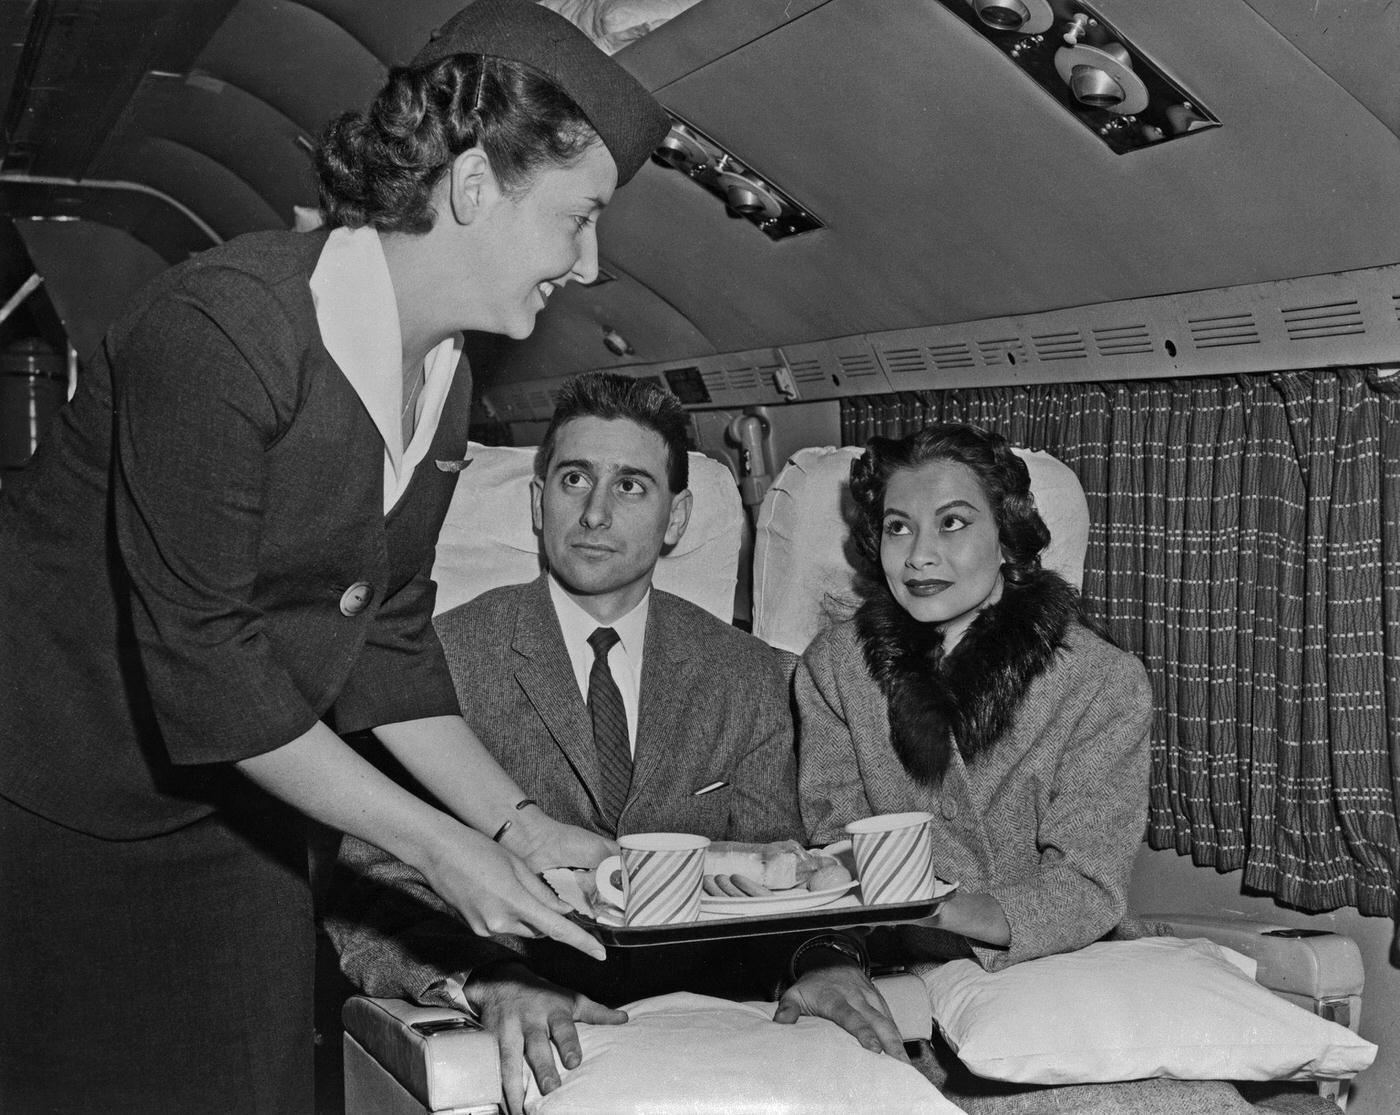 Passengers on a Transocean Air Lines Boeing 377 Stratocruiser in the mid 1950s enjoy a light snack served by a friendly air hostess. Transocean Air Lines was a pioneering discount airline that operated between 1946 and 1962.